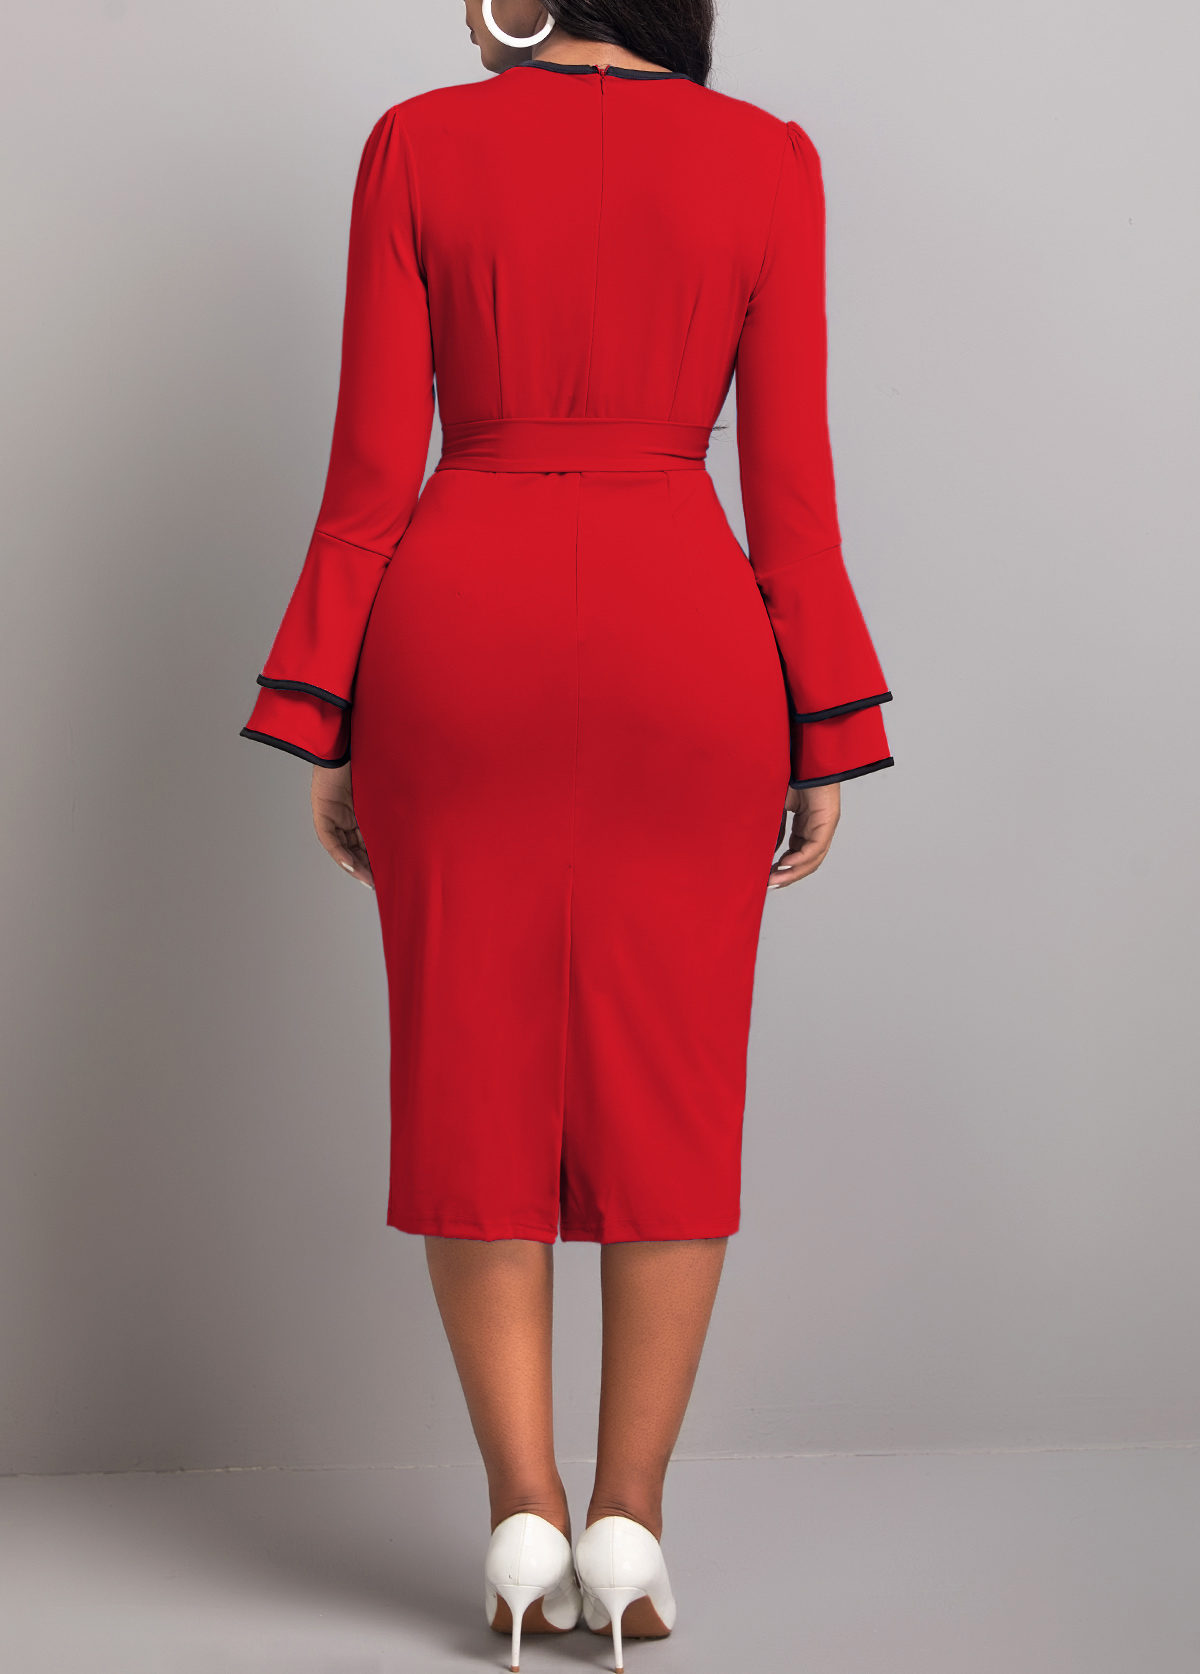 Contrast Binding Belted Wine Red Bodycon Dress